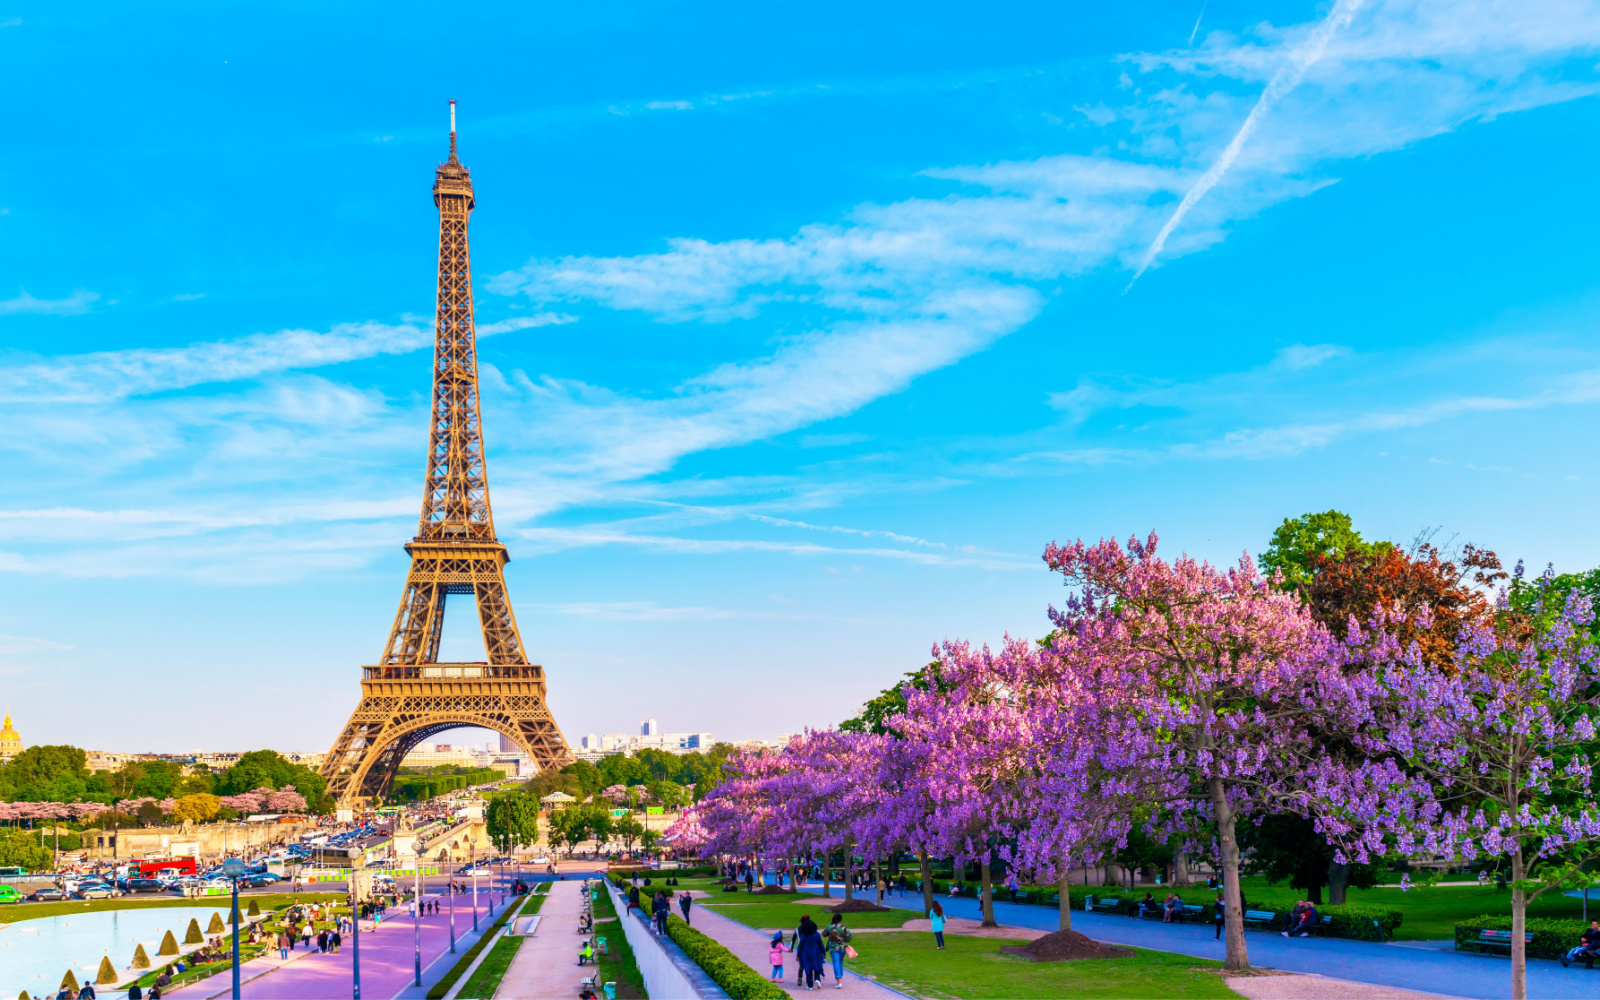 25 Interesting Facts About Paris to Inspire Your Trip